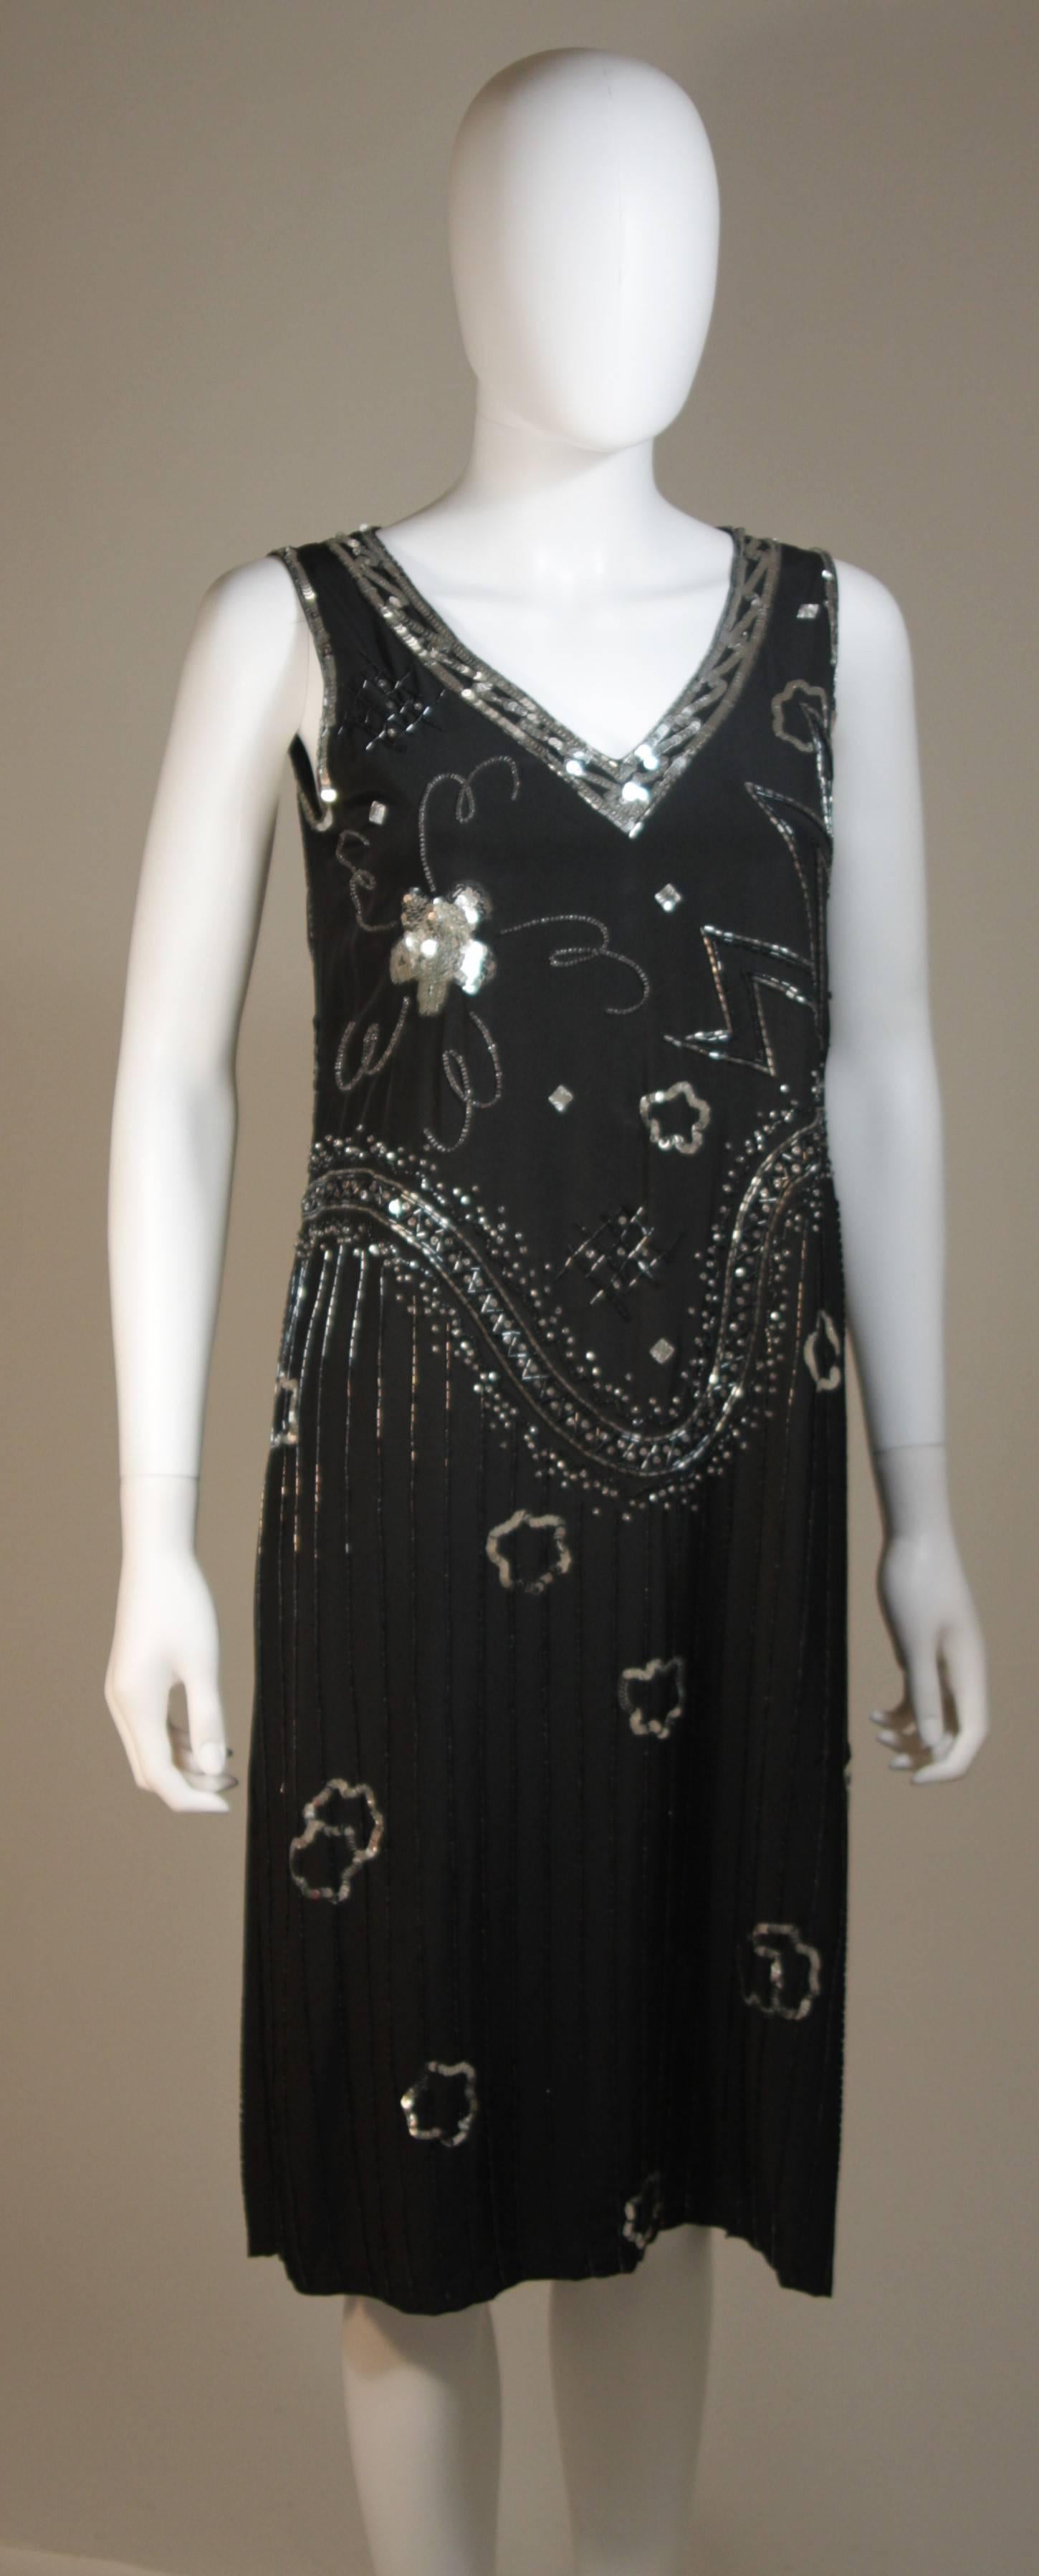 Women's GIORGIO BEVERLY HILLS Sequin Embellished Deco Inspired Cocktail Dress Size 4-6 For Sale